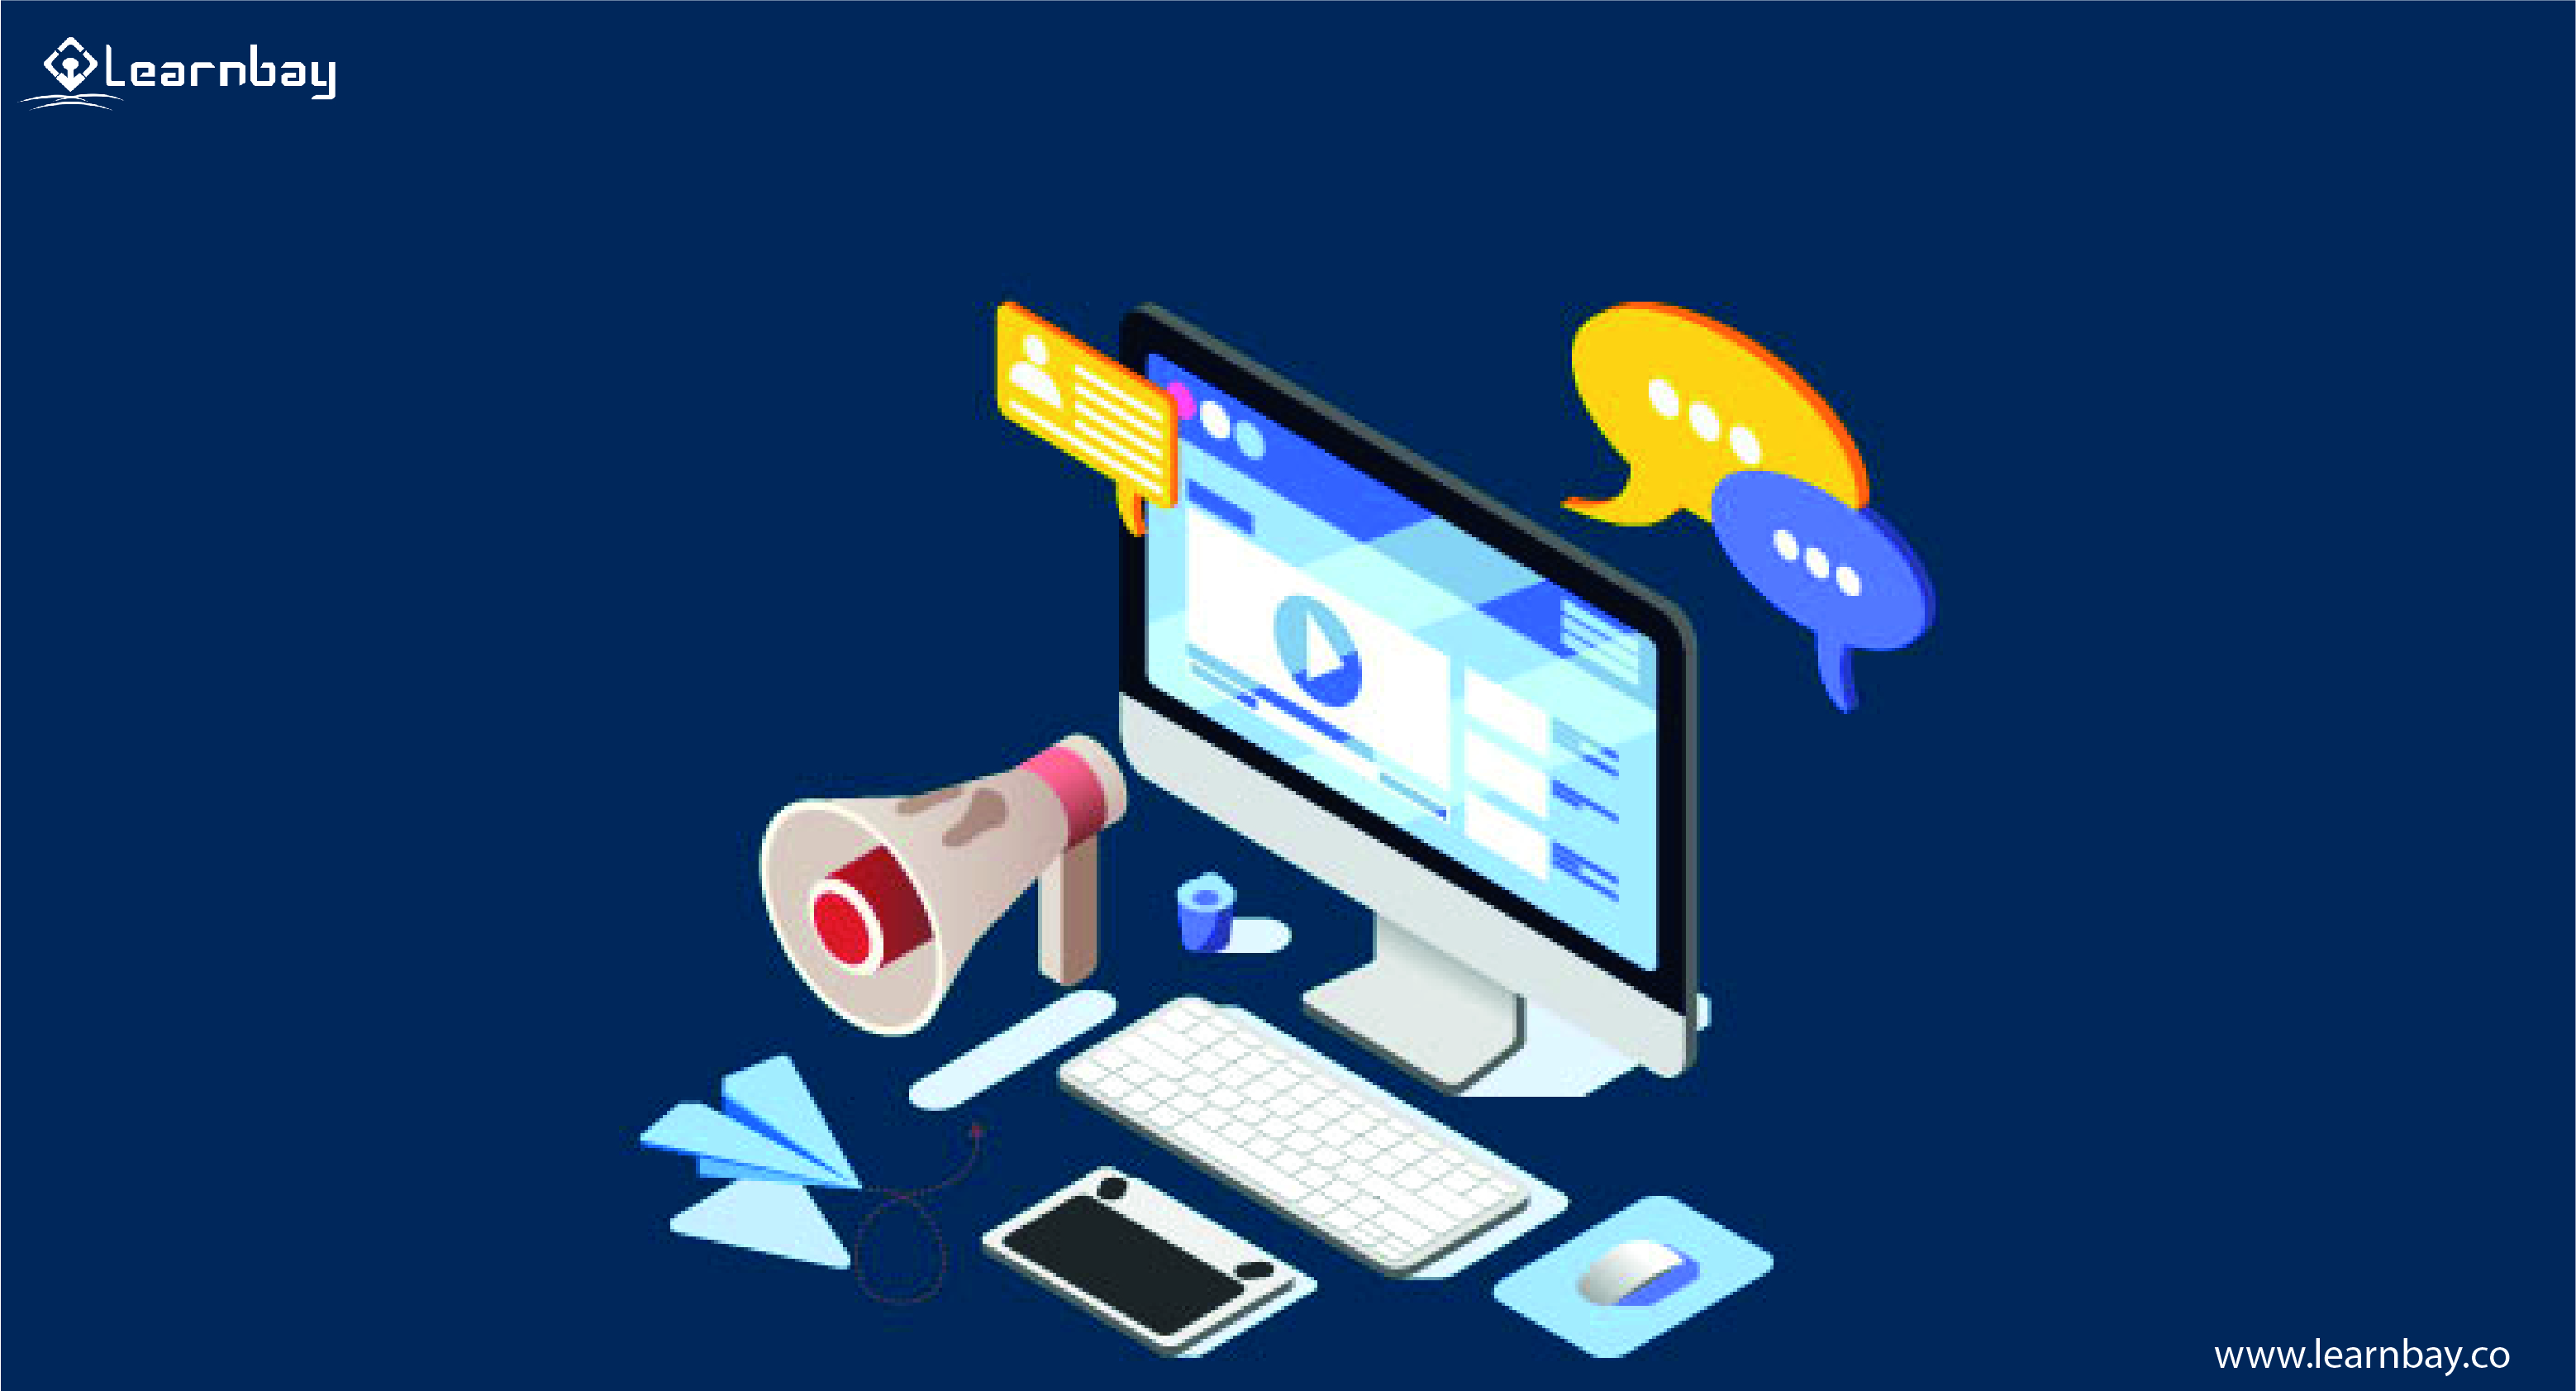 An illustration shows a desktop, keyboard, mouse, and megaphone on a table with a Messenger logo at the top.